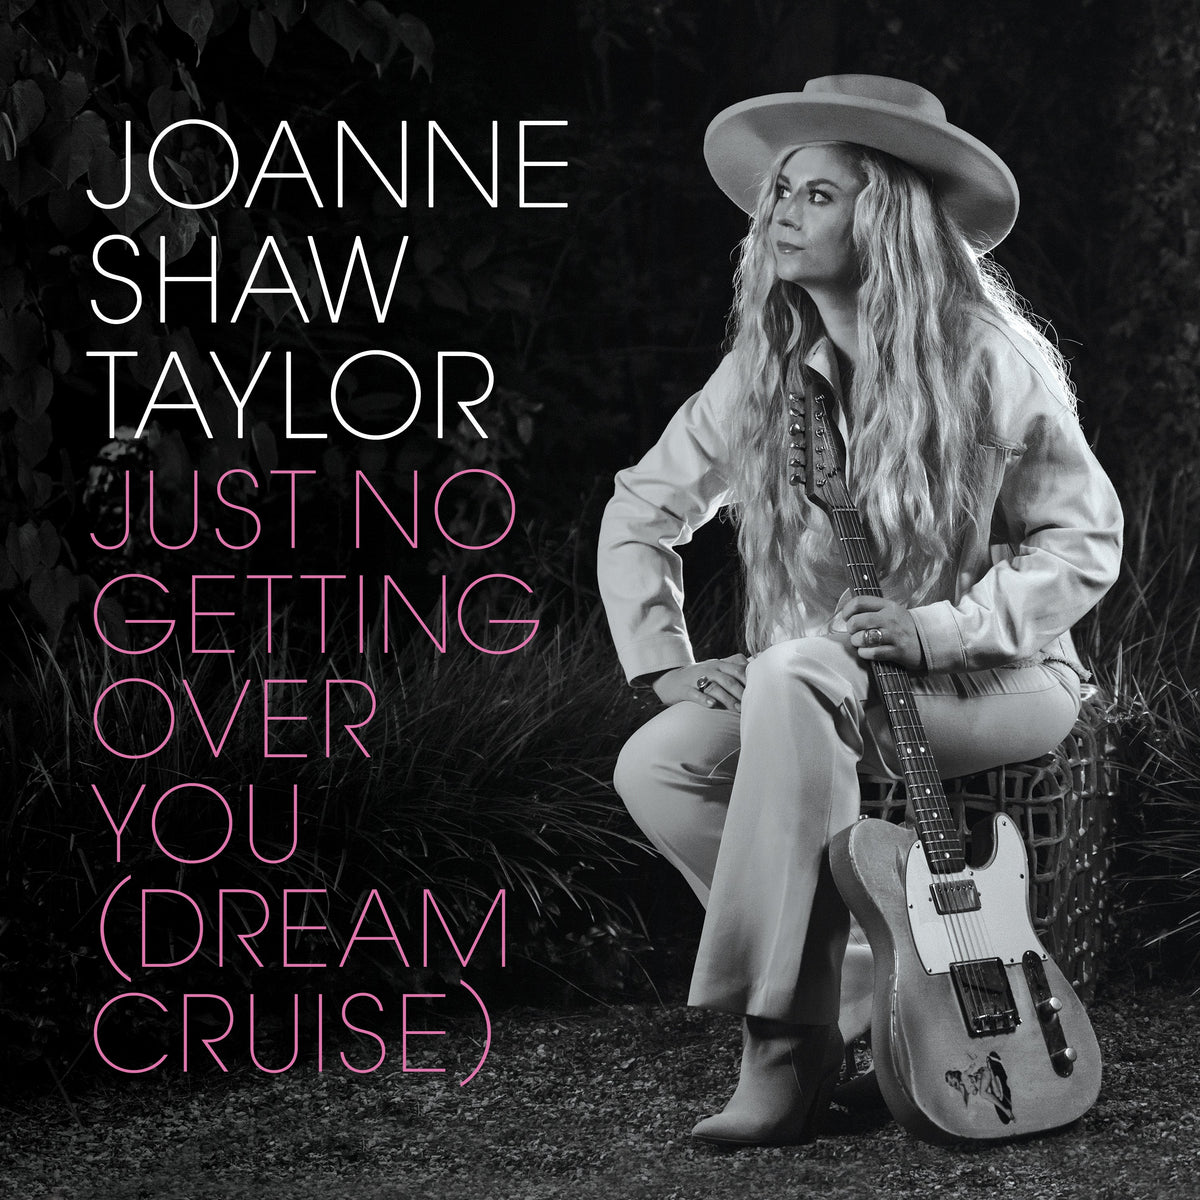 Joanne Shaw Taylor: "Just No Getting Over You" (Dream Cruise) - Single